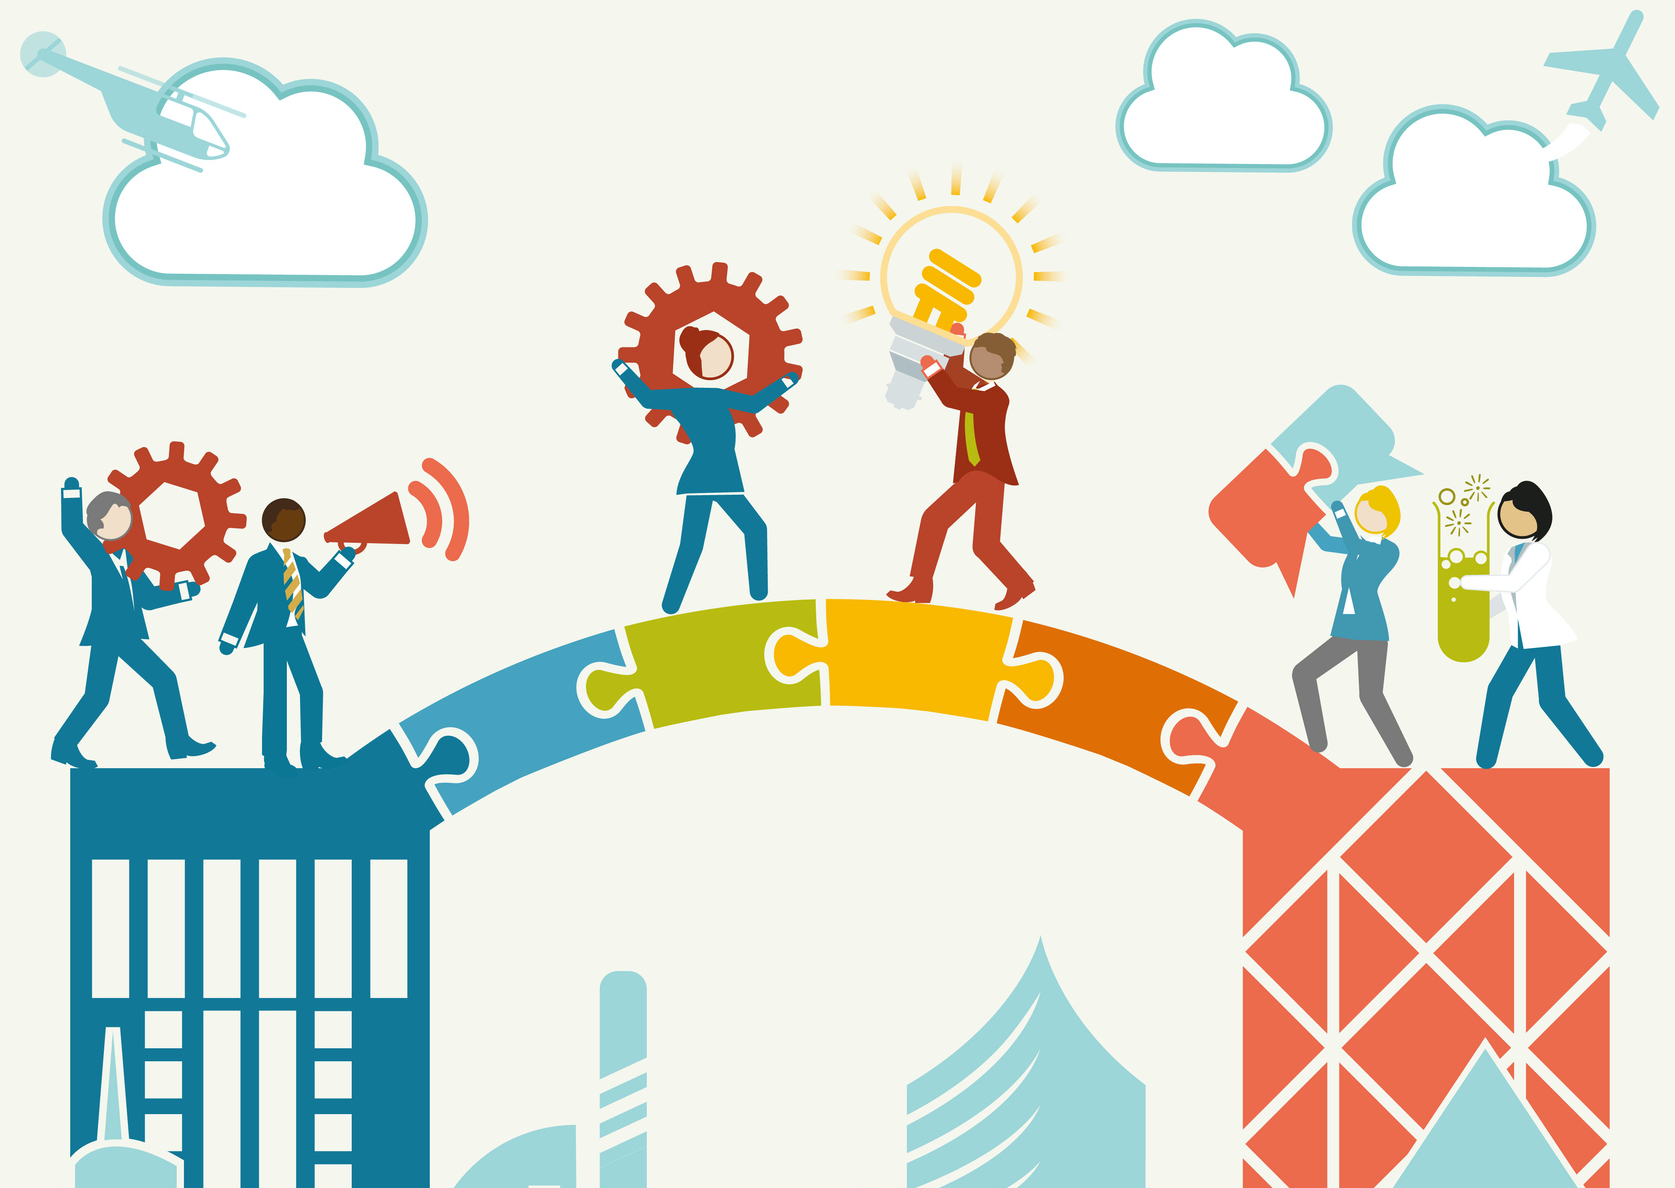 A colorful illustration of people on a bridge that looks like a puzzle. Each person carries something, including a cog, a lightbulb, a megaphone, and a beaker, to indicate collaboration.